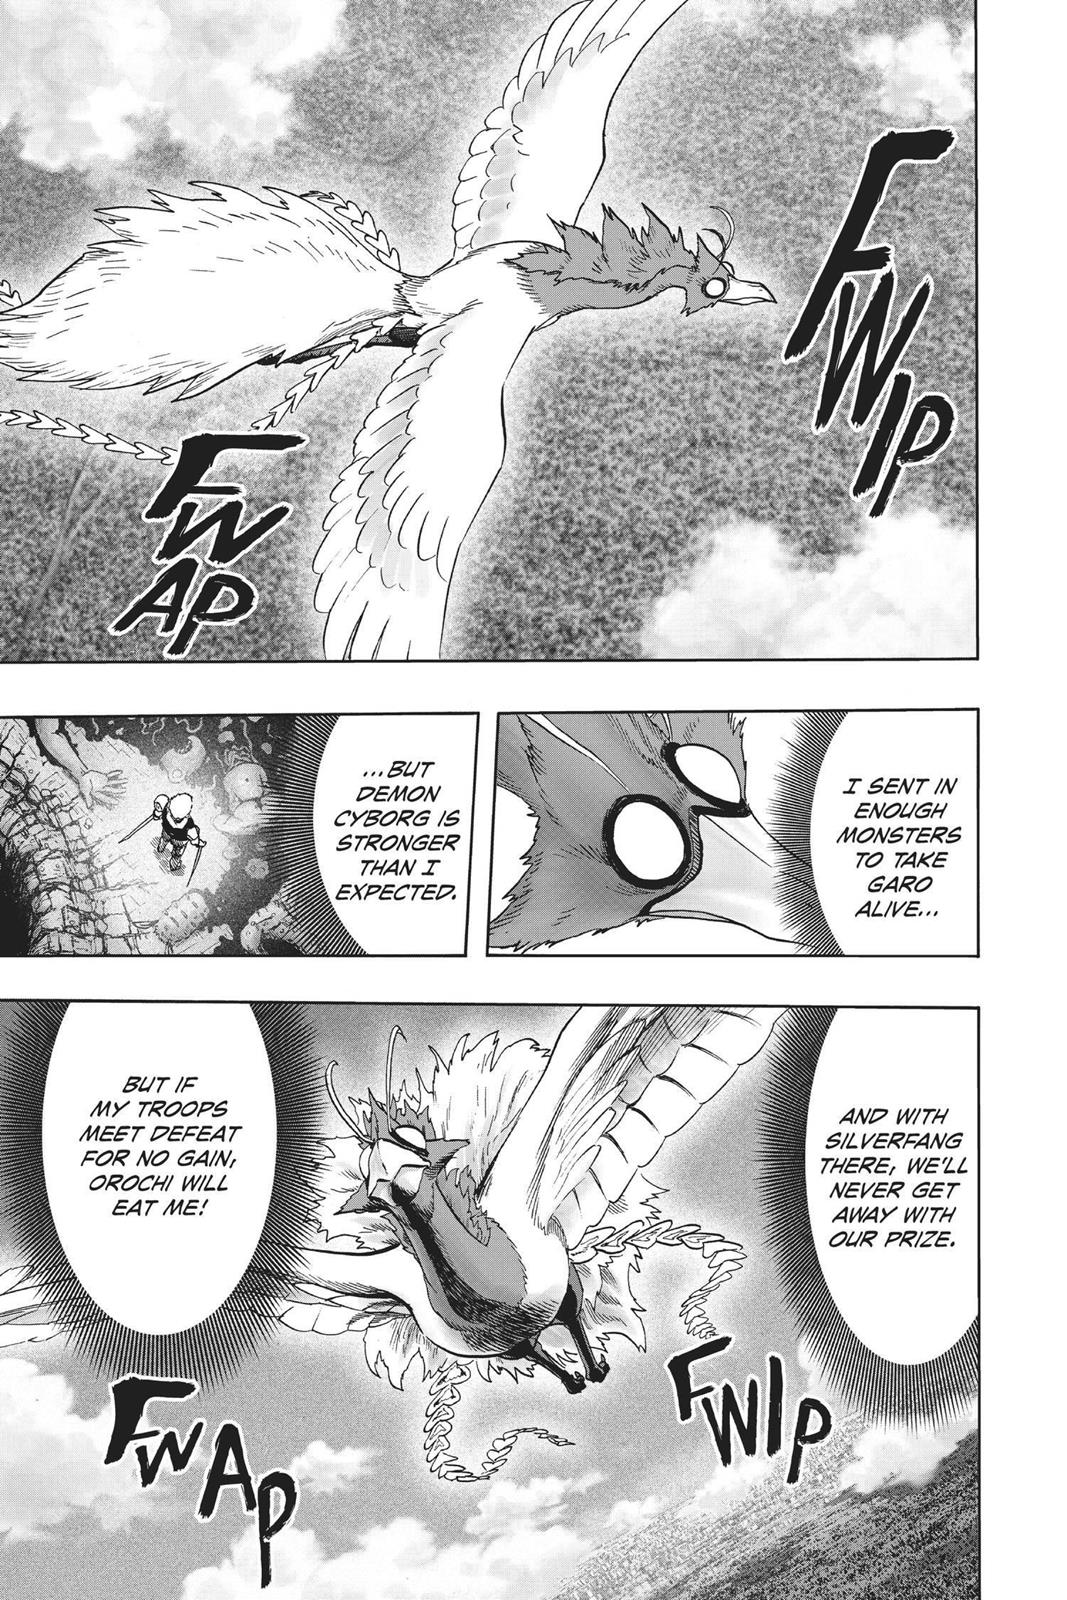 One-Punch Man, Punch 84 image 19